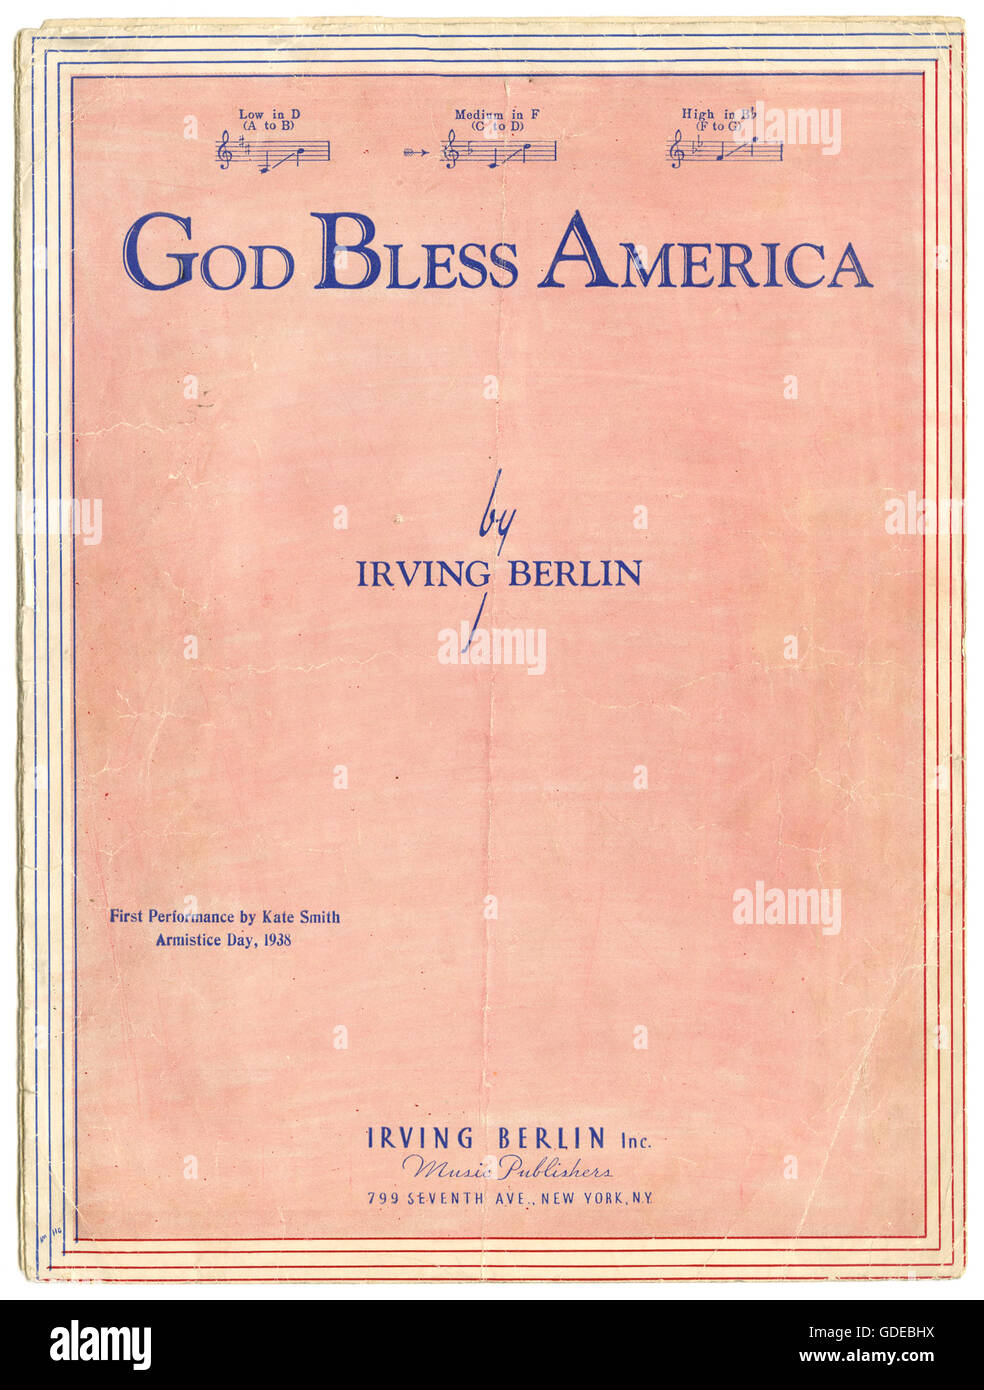 Piano sheet music cover for God Bless America by Irving Berlin 1938 Stock Photo